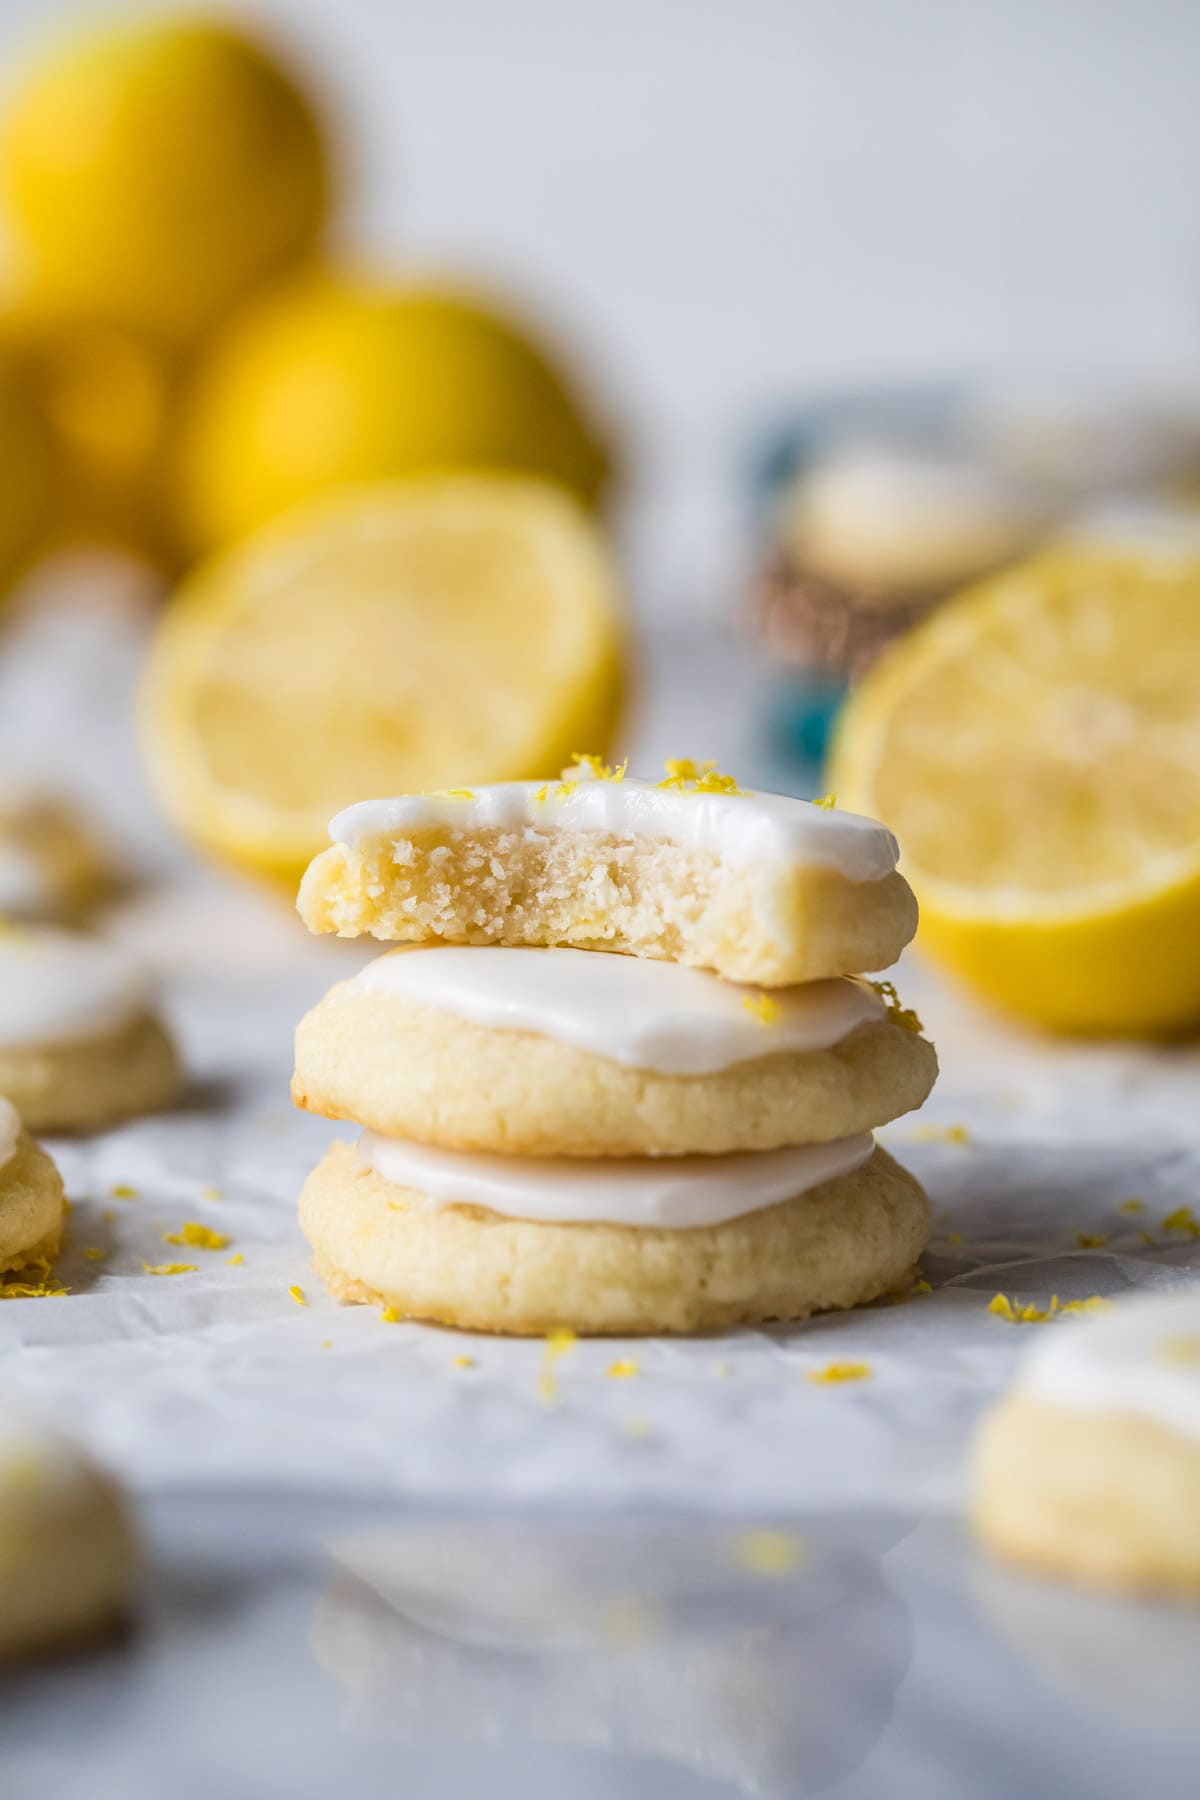 Stack of three lemon meltaway cookies with the top cookie missing a bite.